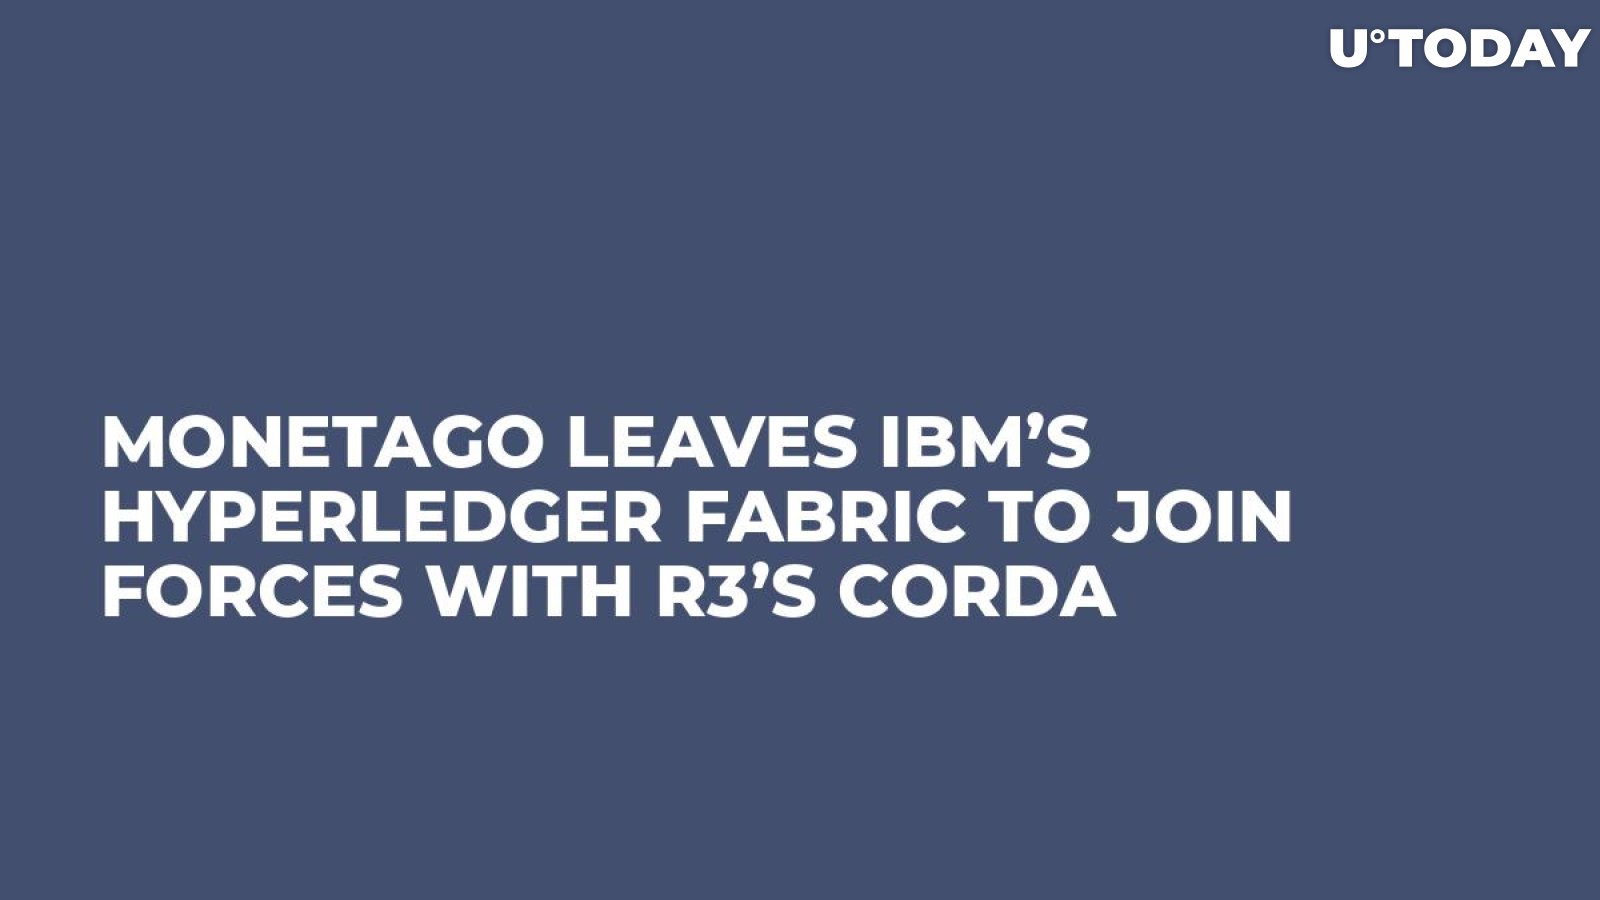 MonetaGo Leaves IBM’s Hyperledger Fabric to Join Forces with R3’s Corda